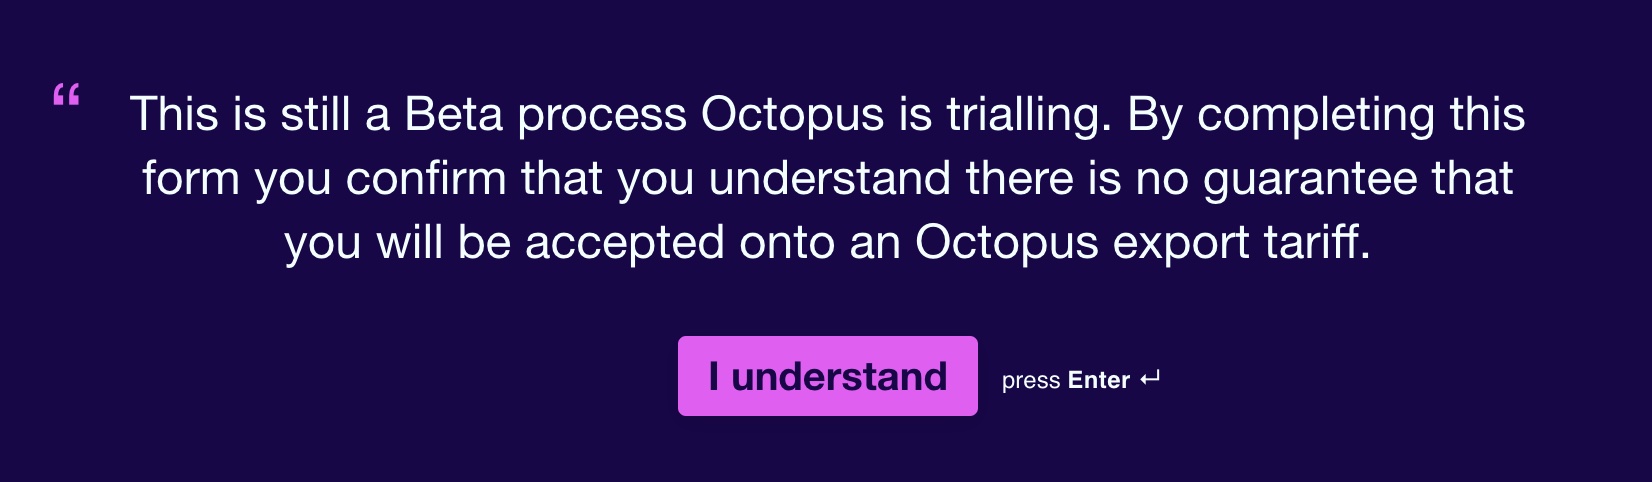 Screenshot from Octopus Energy's form warning users that this is a Beta scheme. Reads: This is still a Beta process Octopus is trialling. By completing this form you confirm that you understand there is no guarantee that you will be accepted onto an Octopus export tariff.